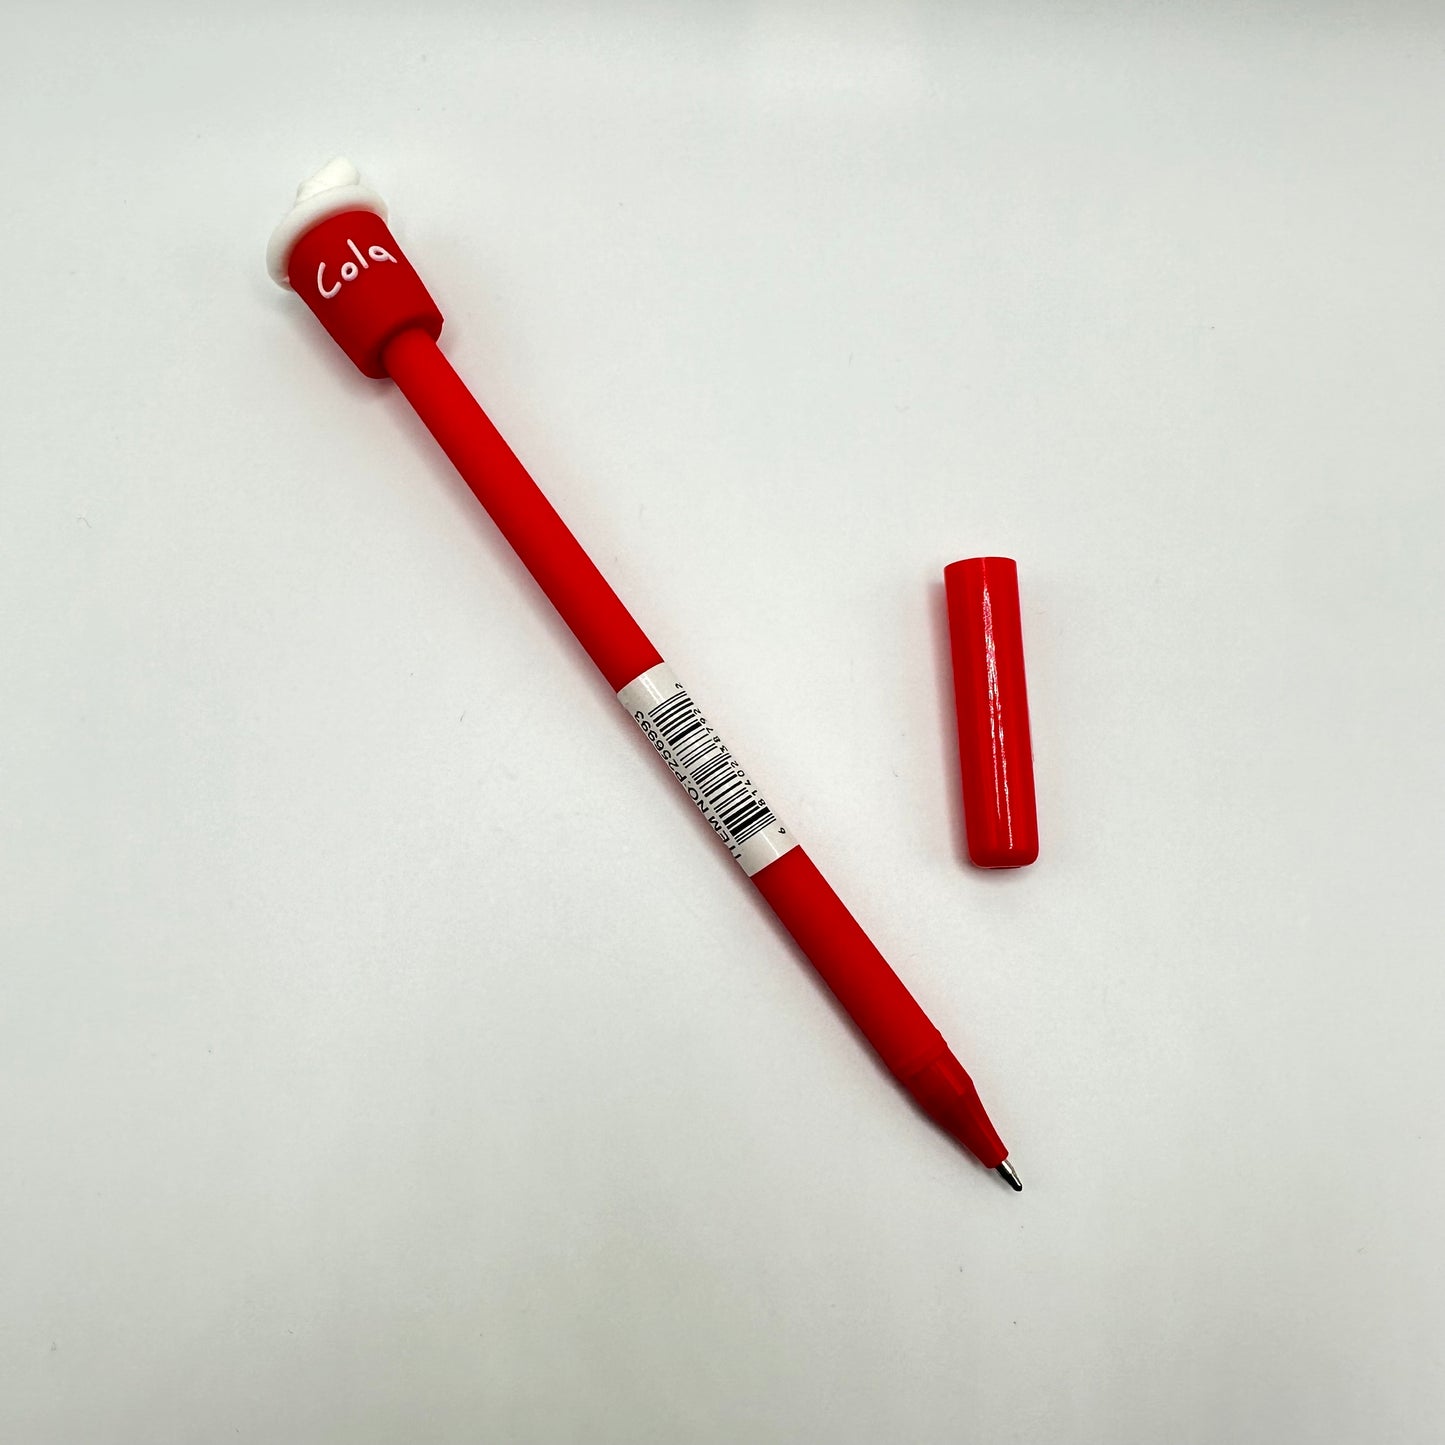 Cola pen with the cap off.